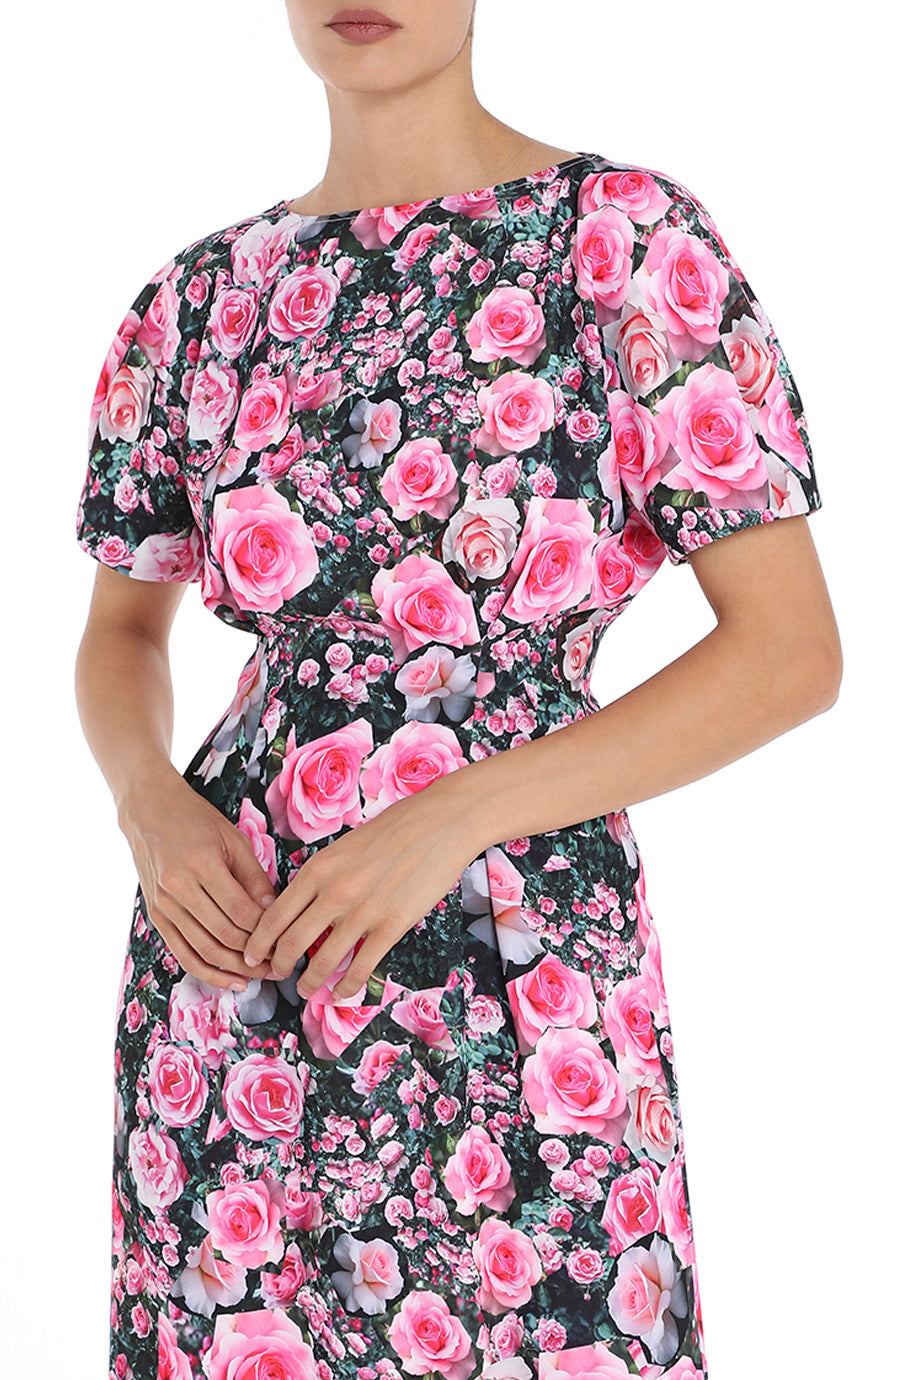 Christopher Kane The Rose Garden Midi Dress in Pink. Detail view. Shop from Etoile La Boutique.